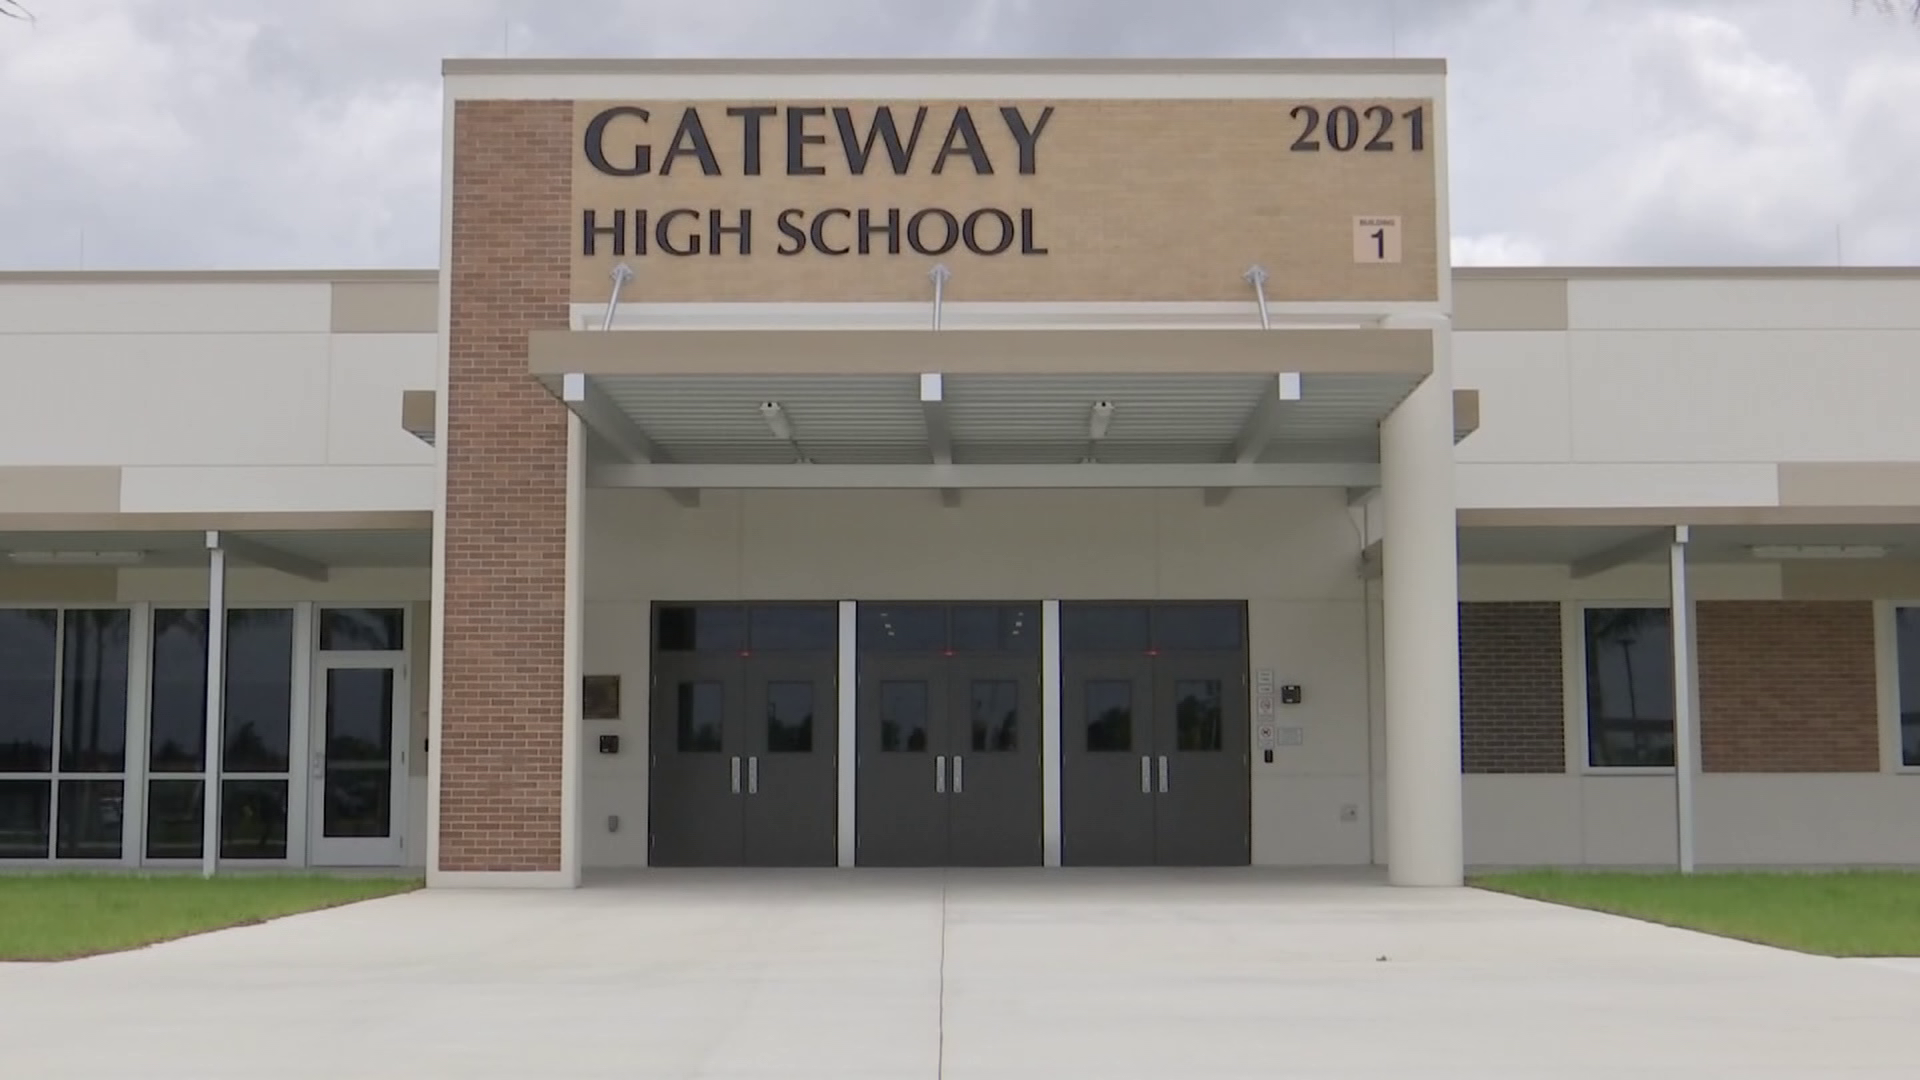 Gateway High School set to open next year with new technology that